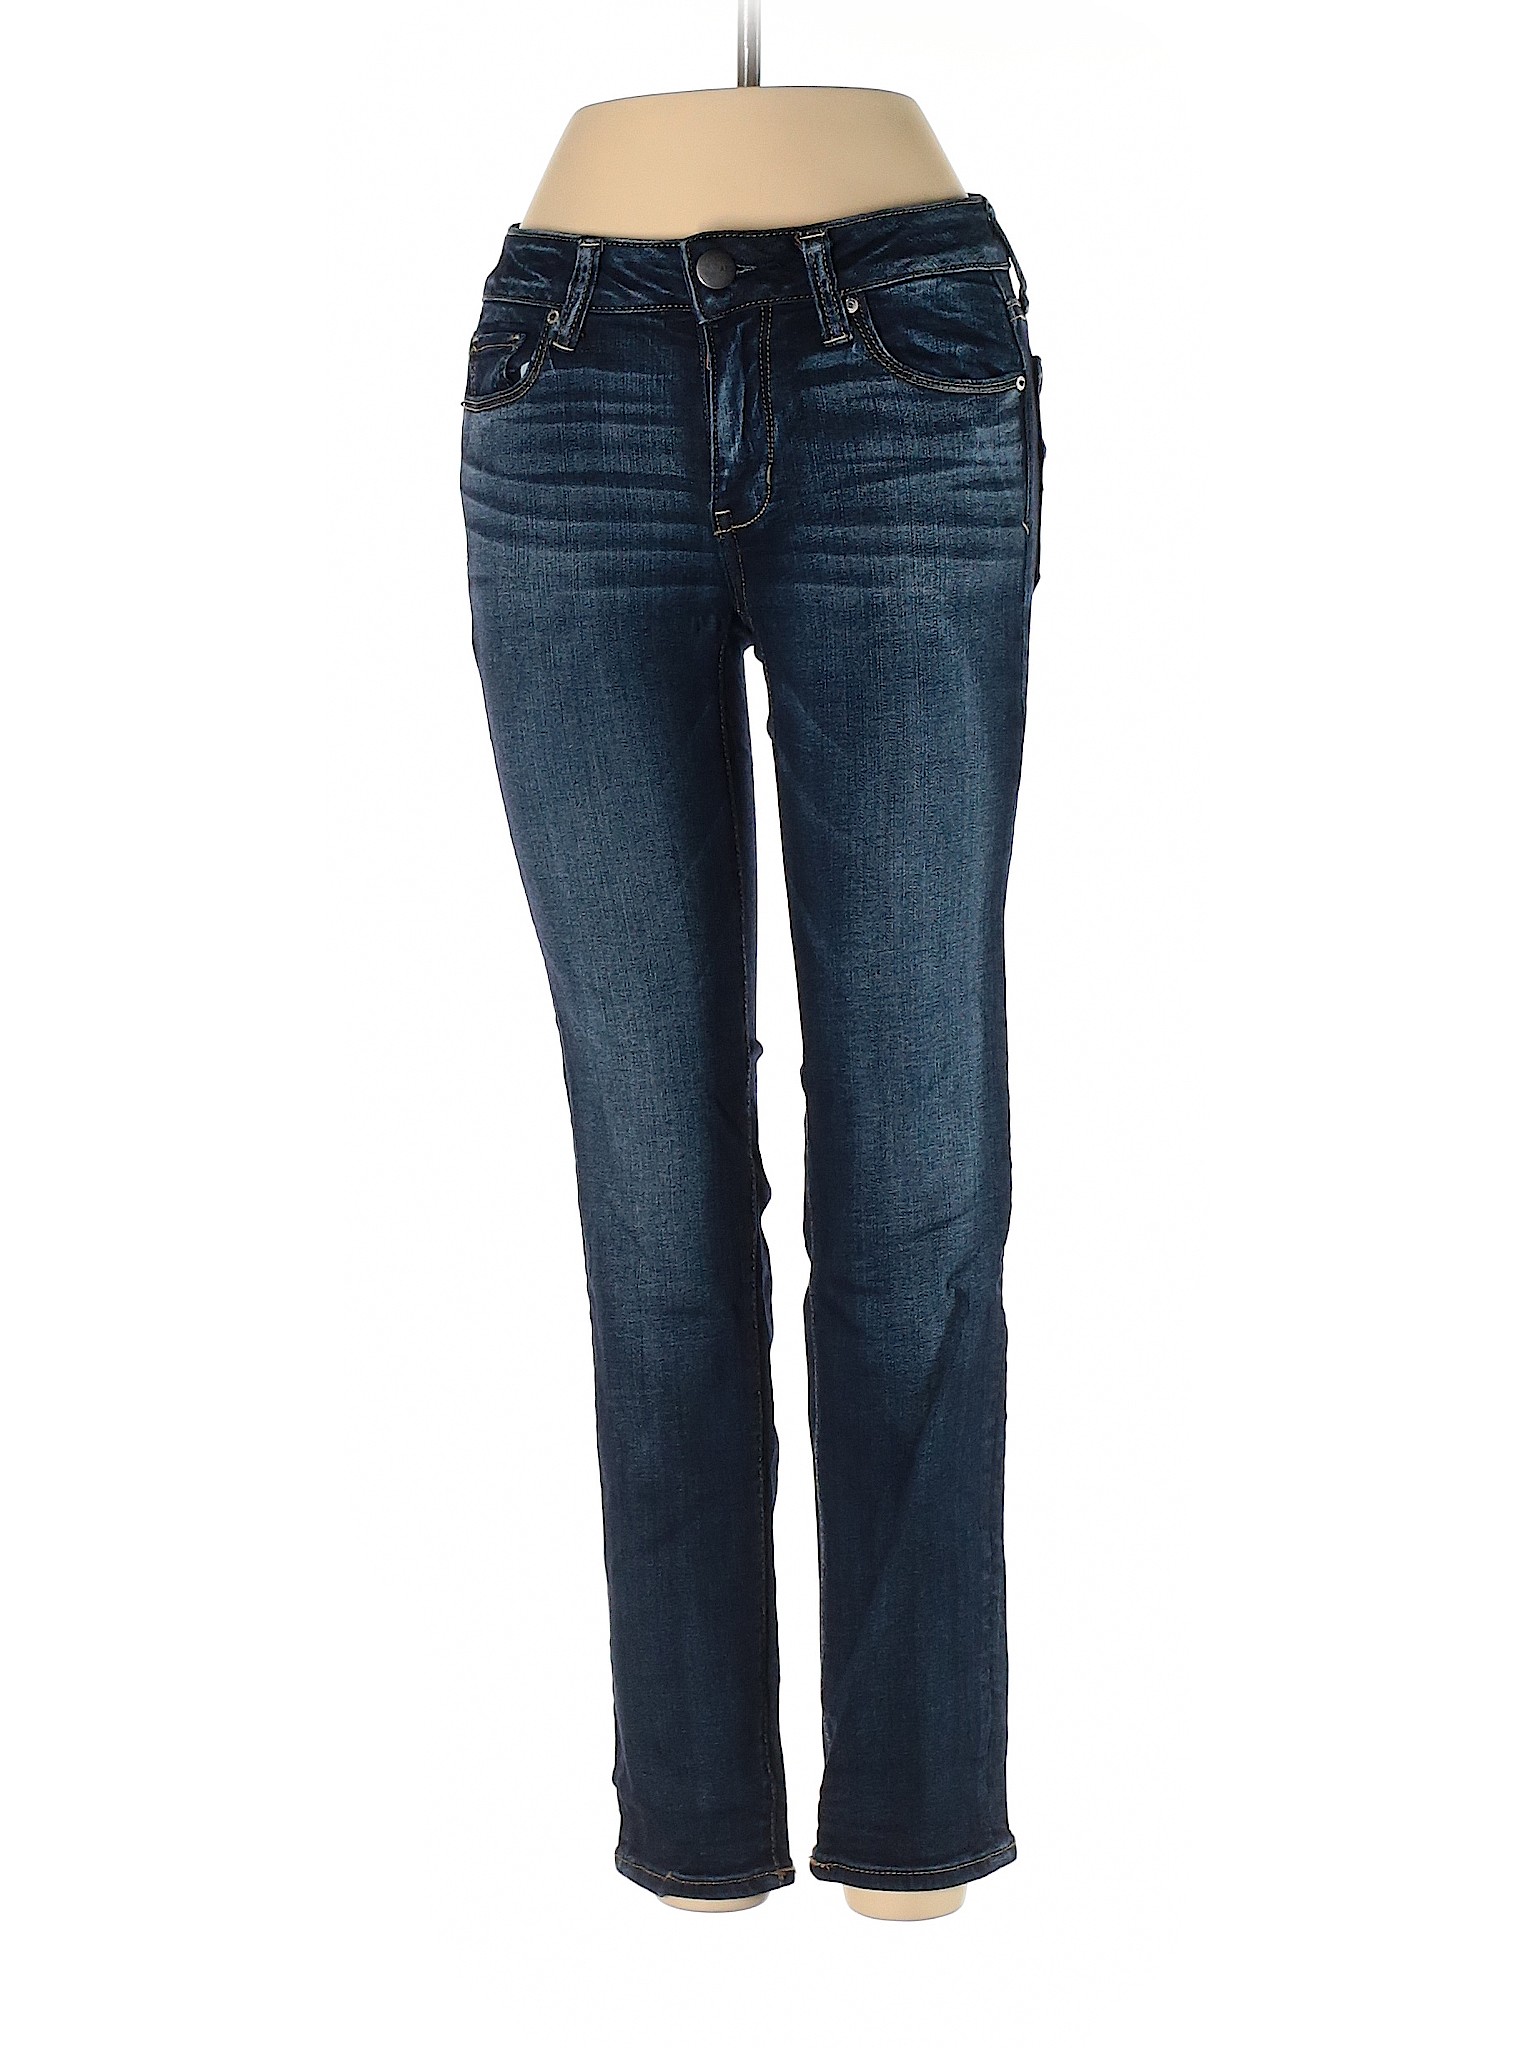 American Eagle Outfitters Women Blue Jeans 0 | eBay